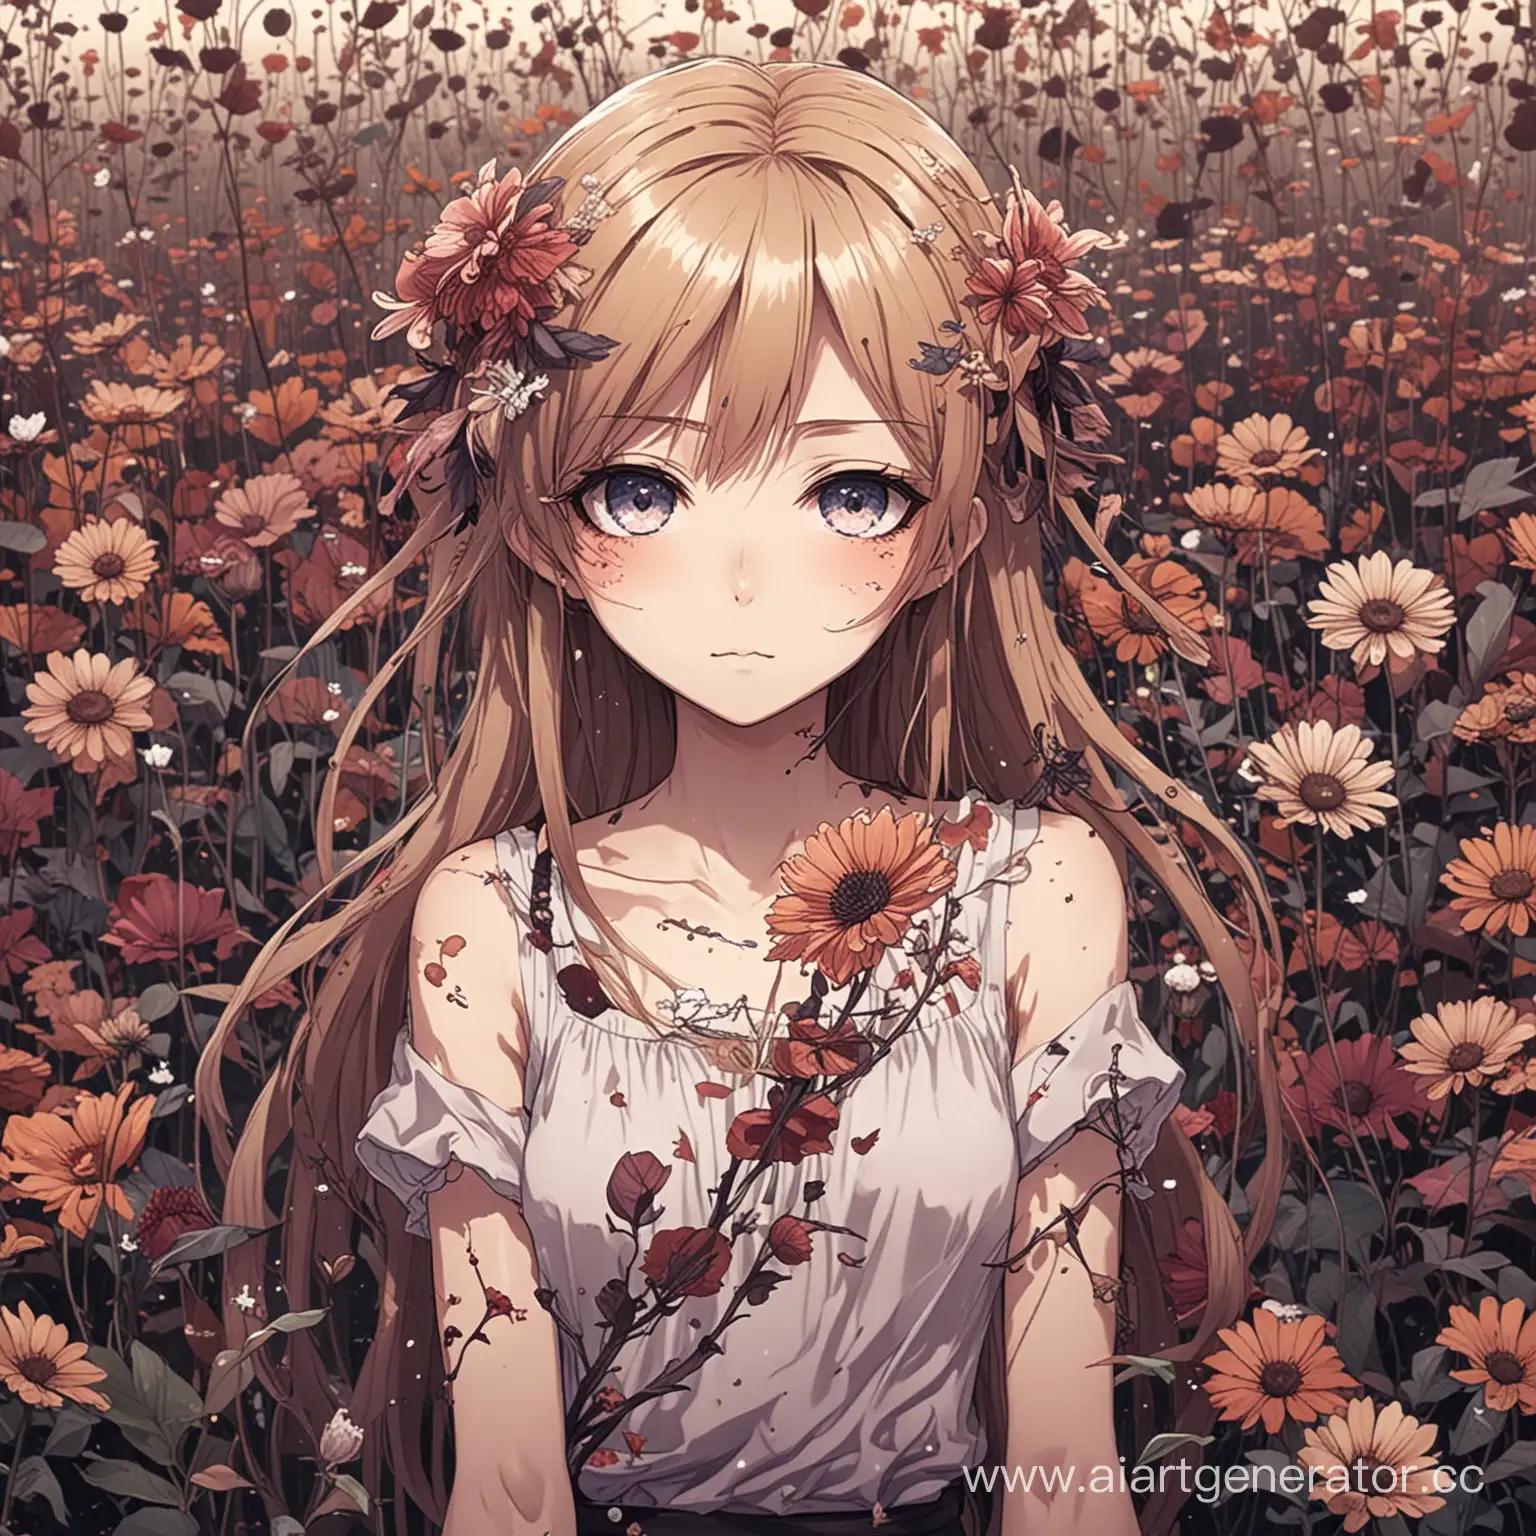 Anime-Illustration-of-Withered-Flowers-in-Moody-Setting